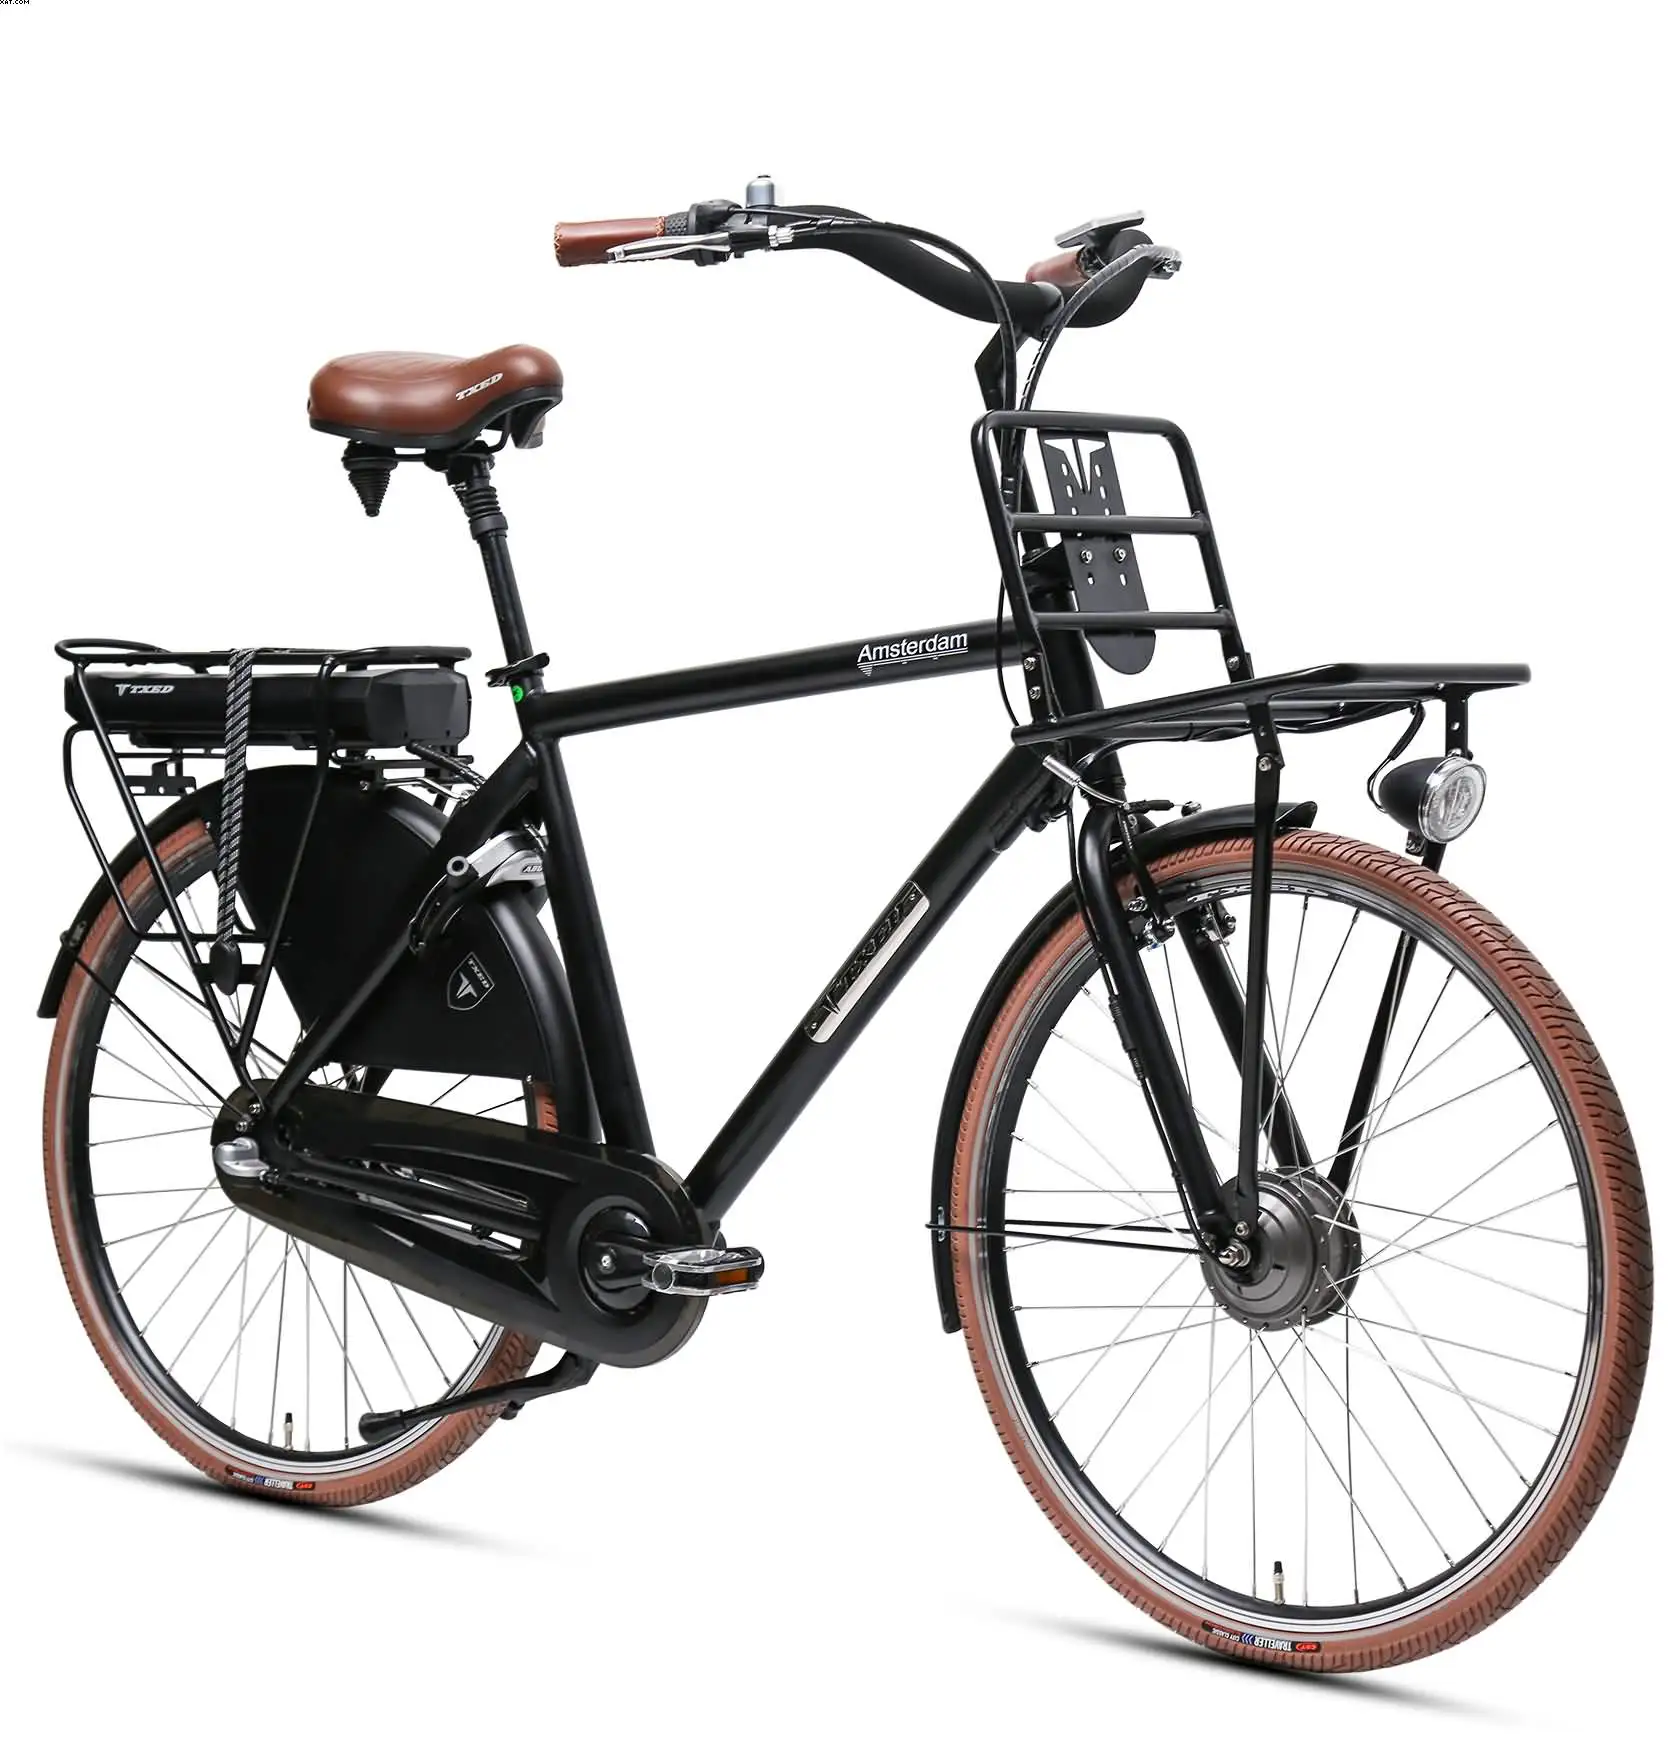 Grootte Certificaat Bespreken 28 Inch Holland City Electric Bike Bicycle For Man Cargo E-bike - Buy City Electric  Bike,Cargo E-bike,City Electric Bicycle For Man Product on Alibaba.com